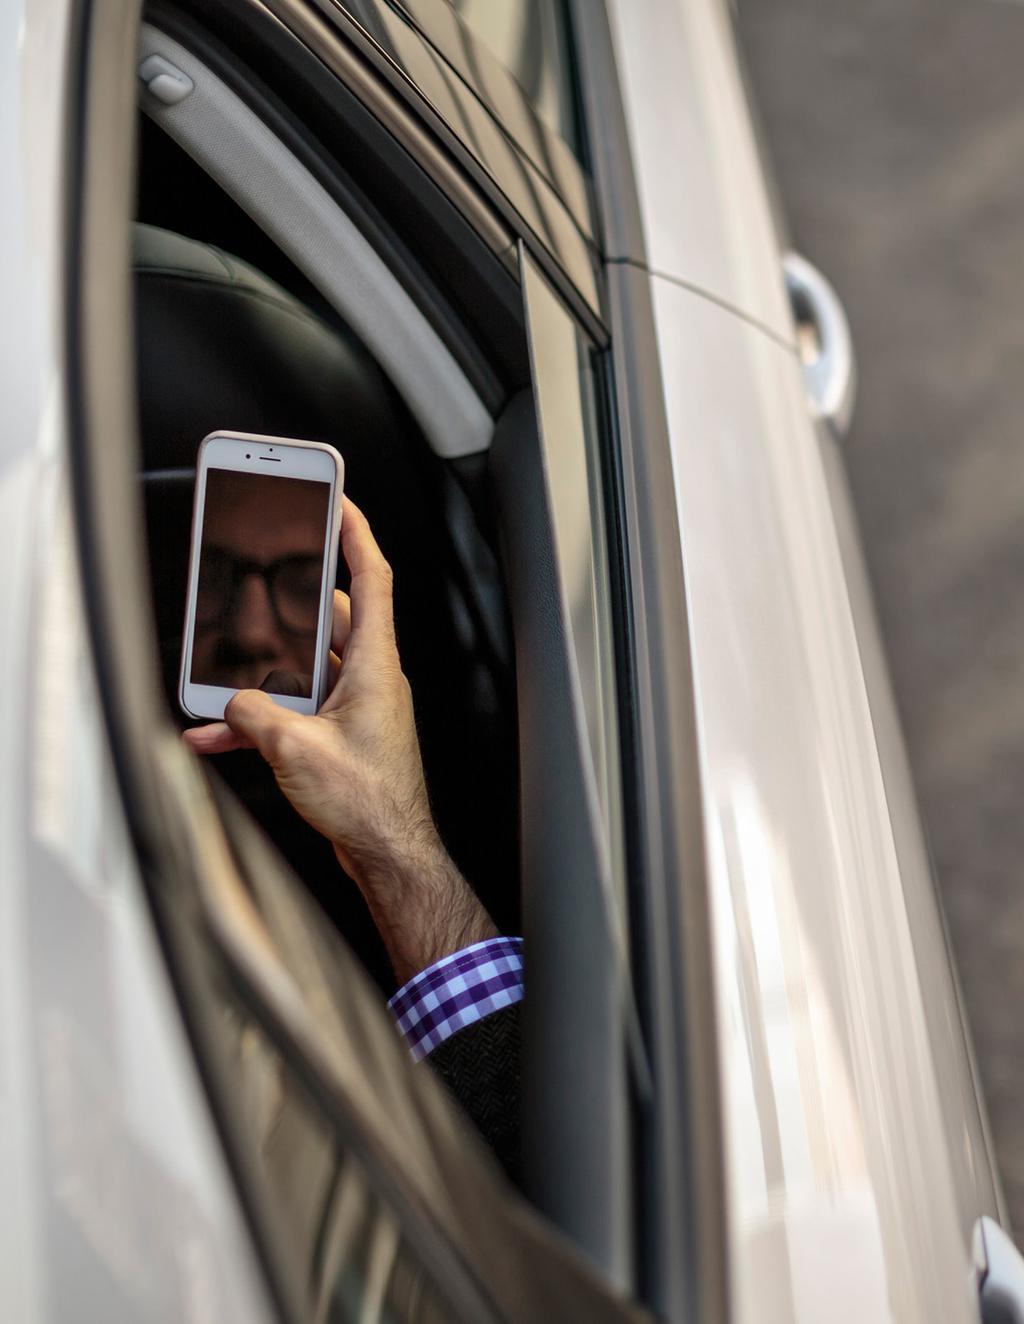 Business travelers choose ridesharing because they want their